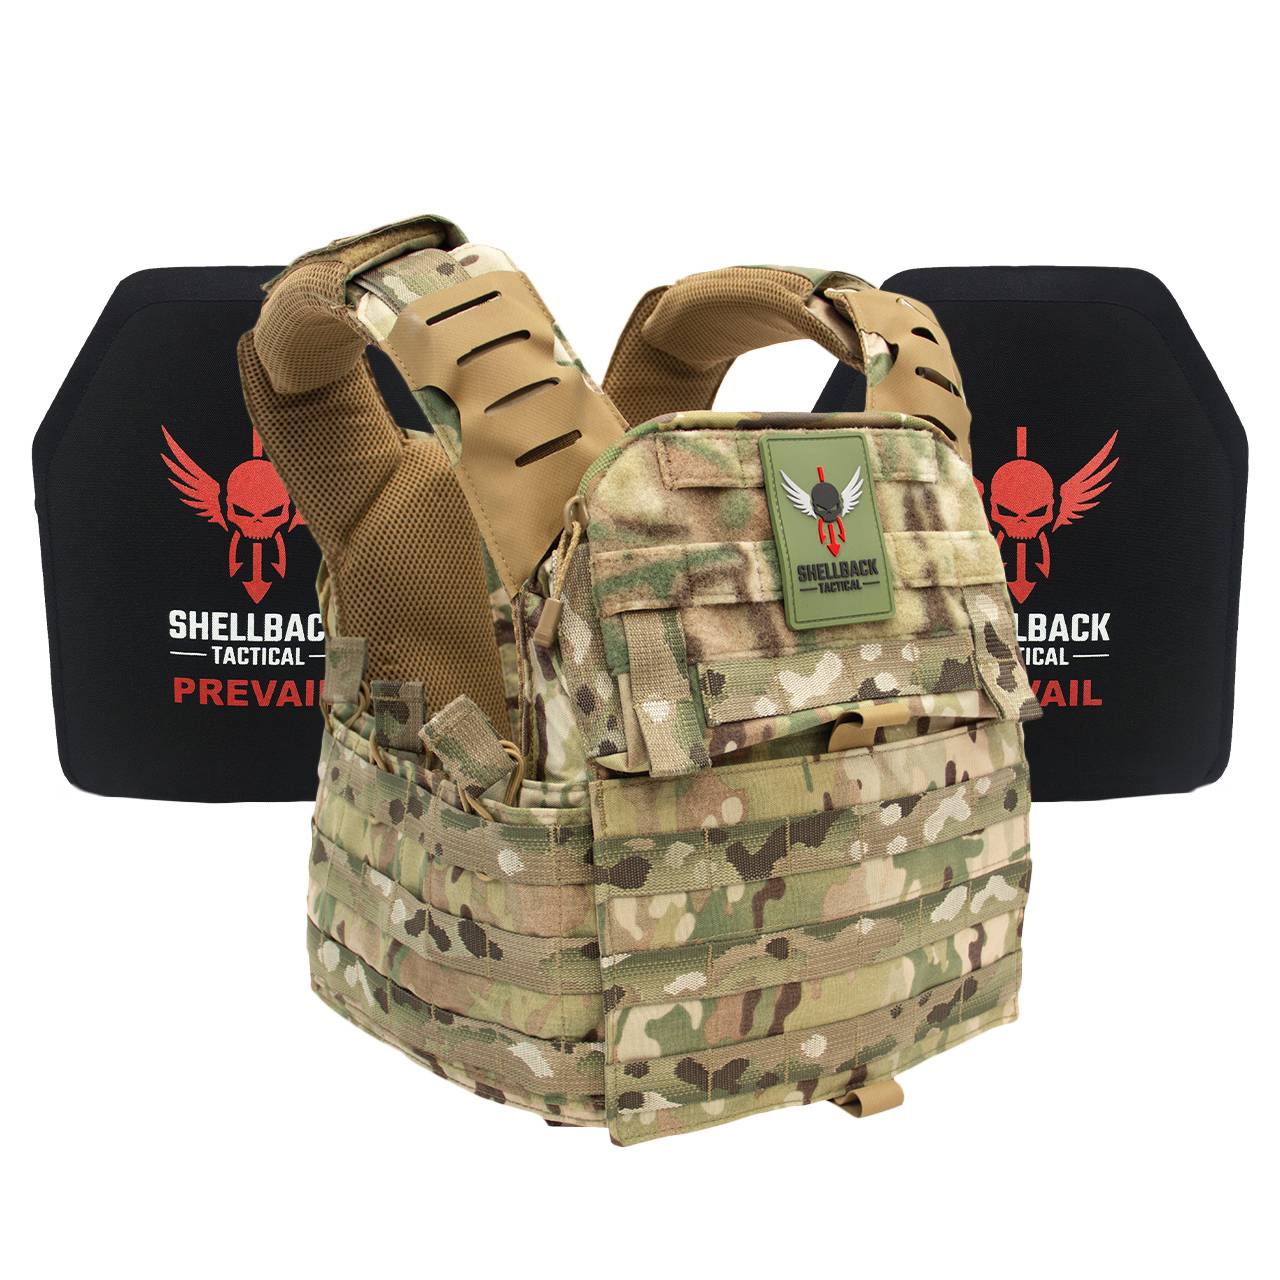 Shellback Banshee Elite 2.0 Lightweight Armor System in MultiCam with Level III Plates